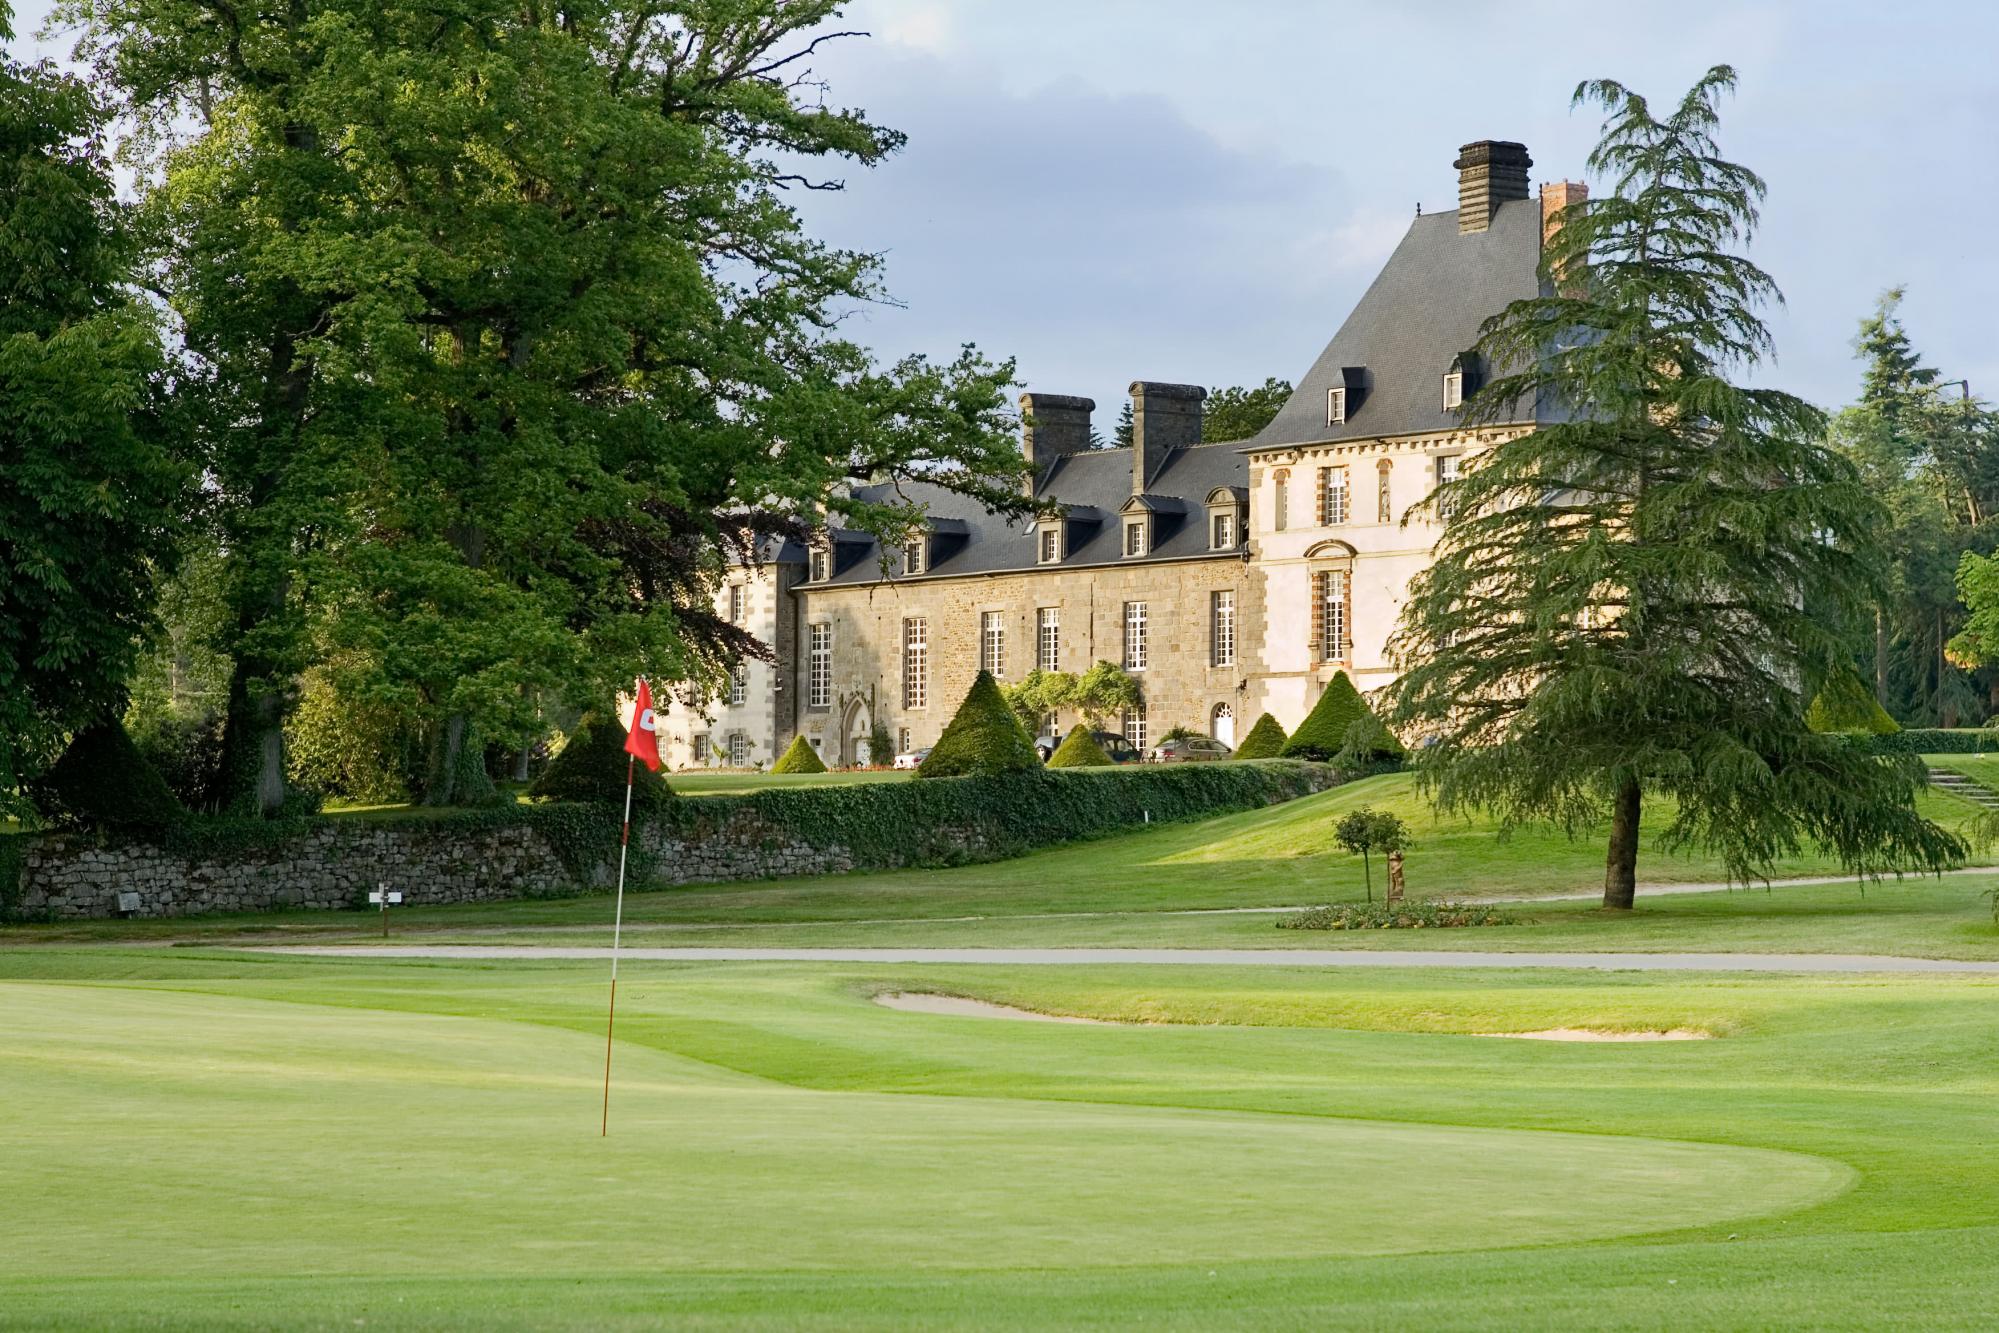 The Golf Les Ormes's lovely golf course situated in marvelous Brittany.